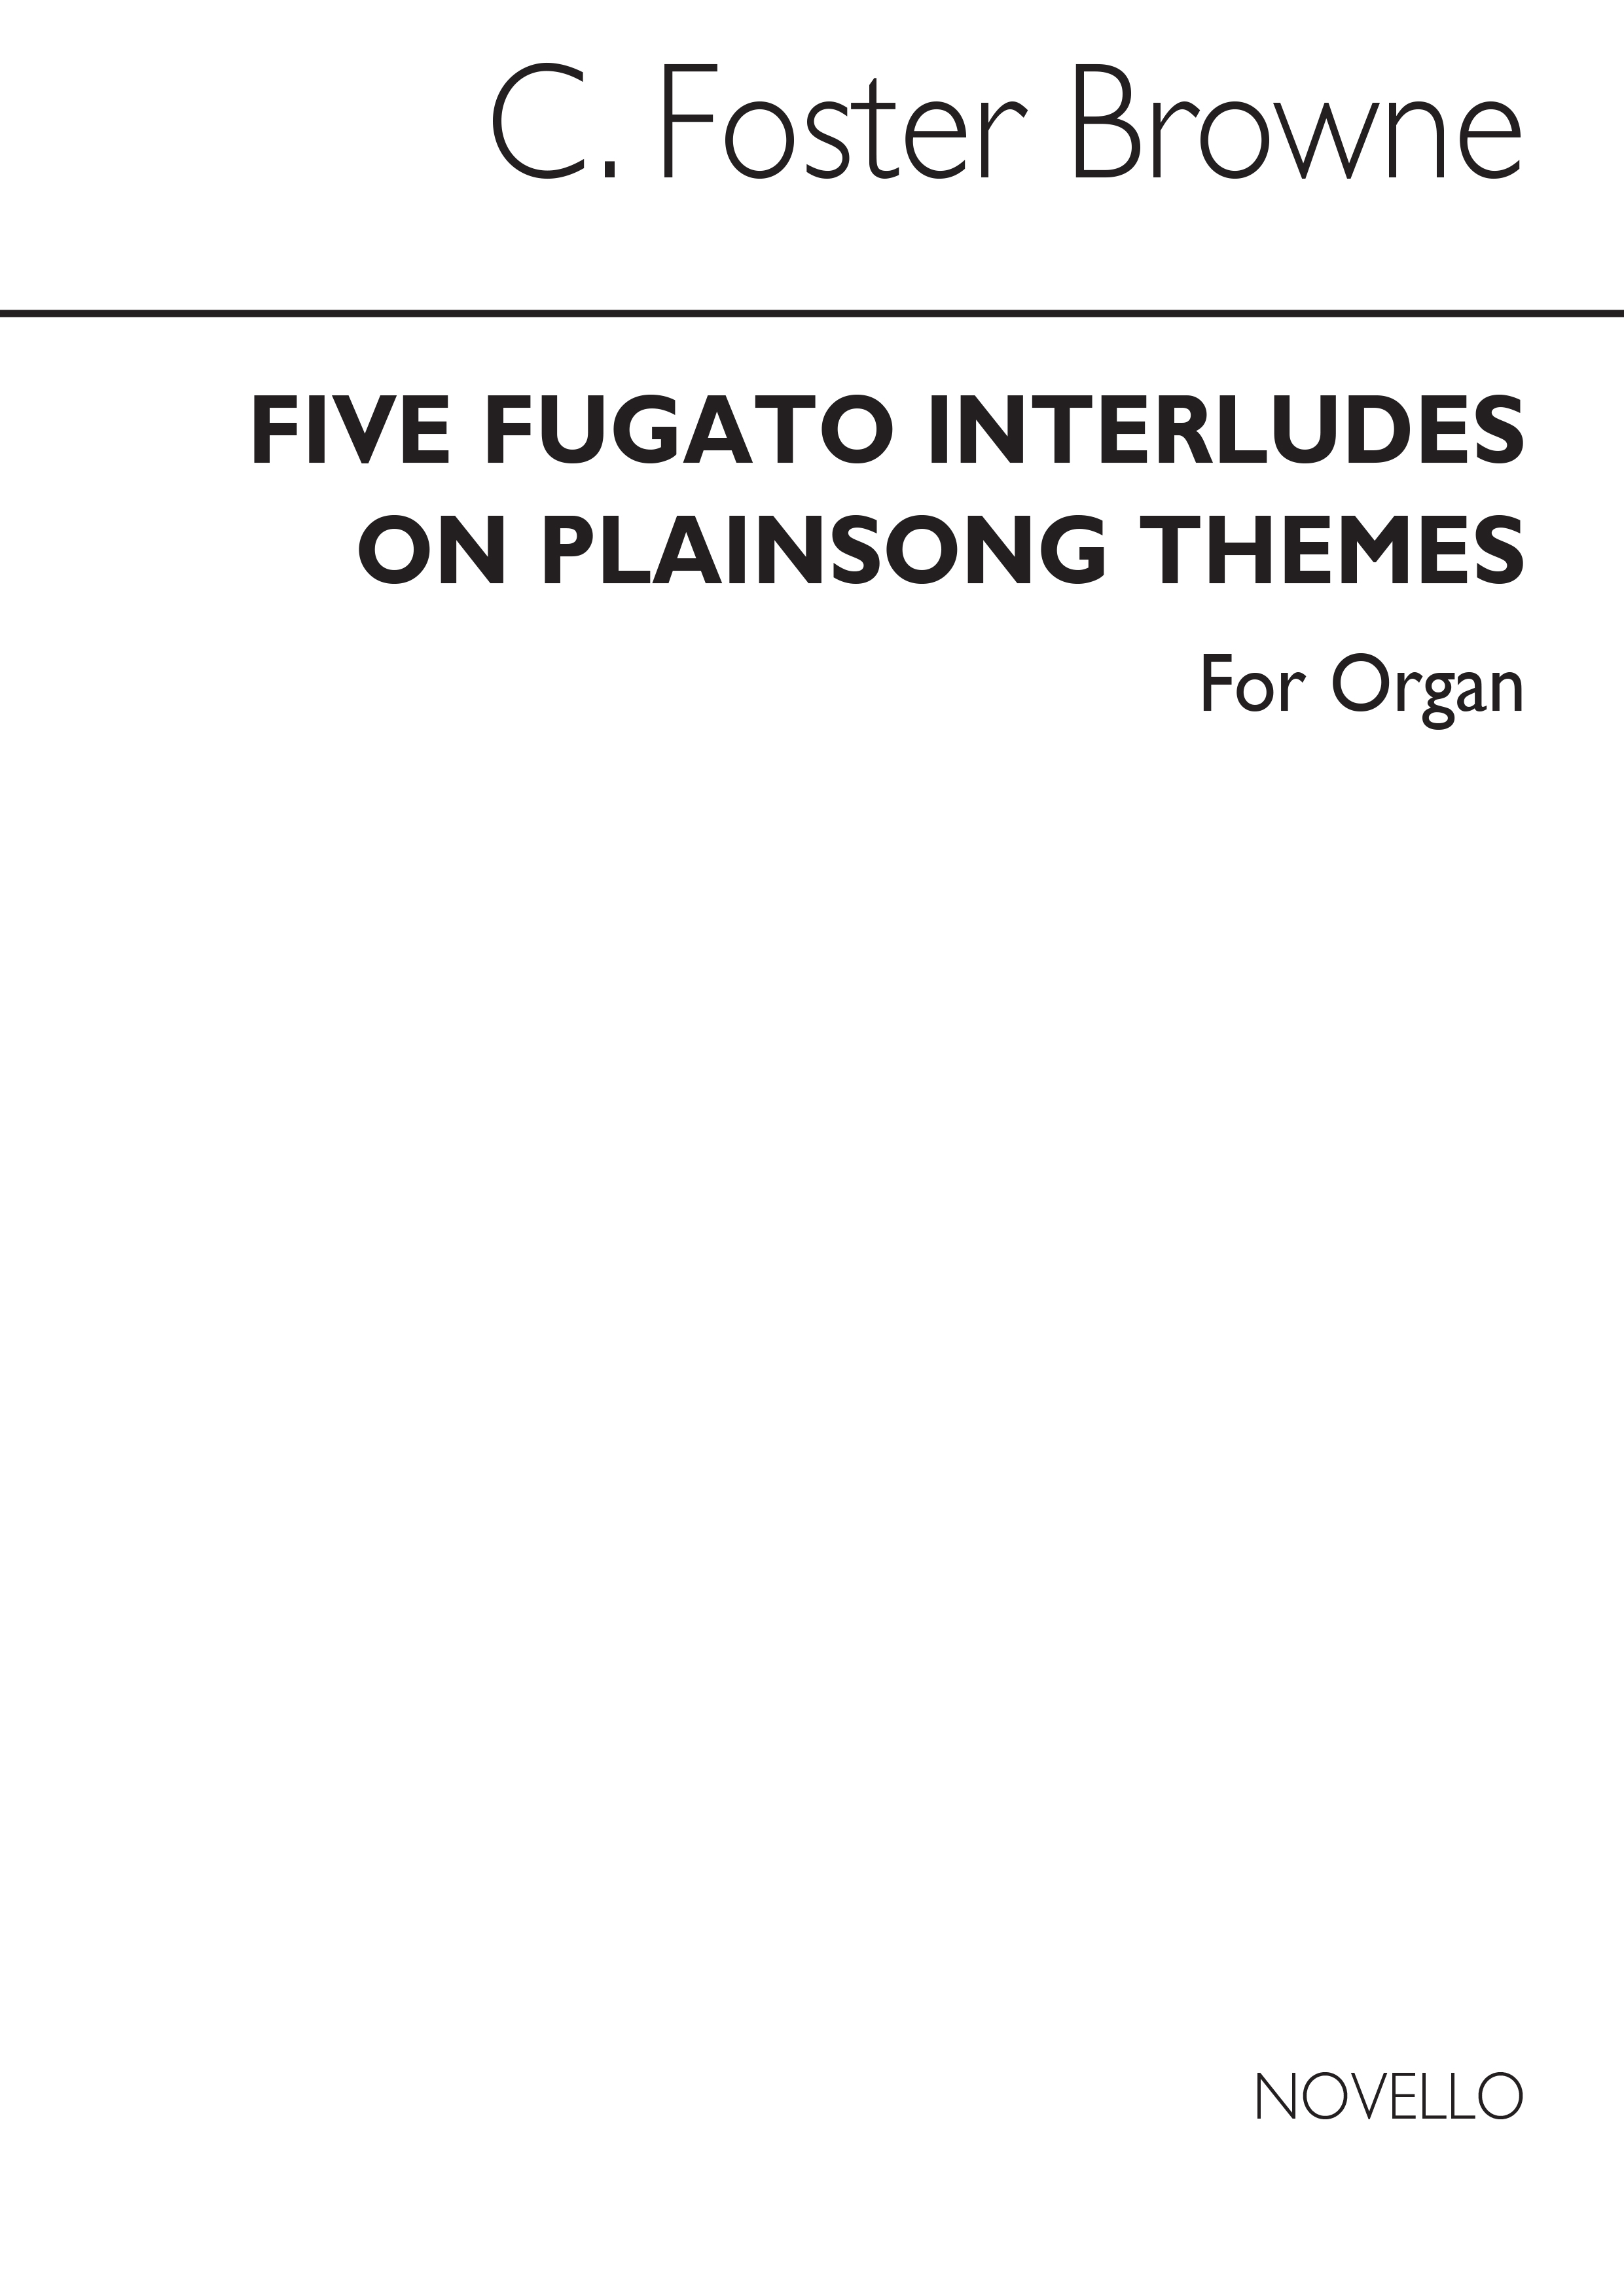 C. Foster Browne: Five Fugato Interludes On Plainsong Themes Organ